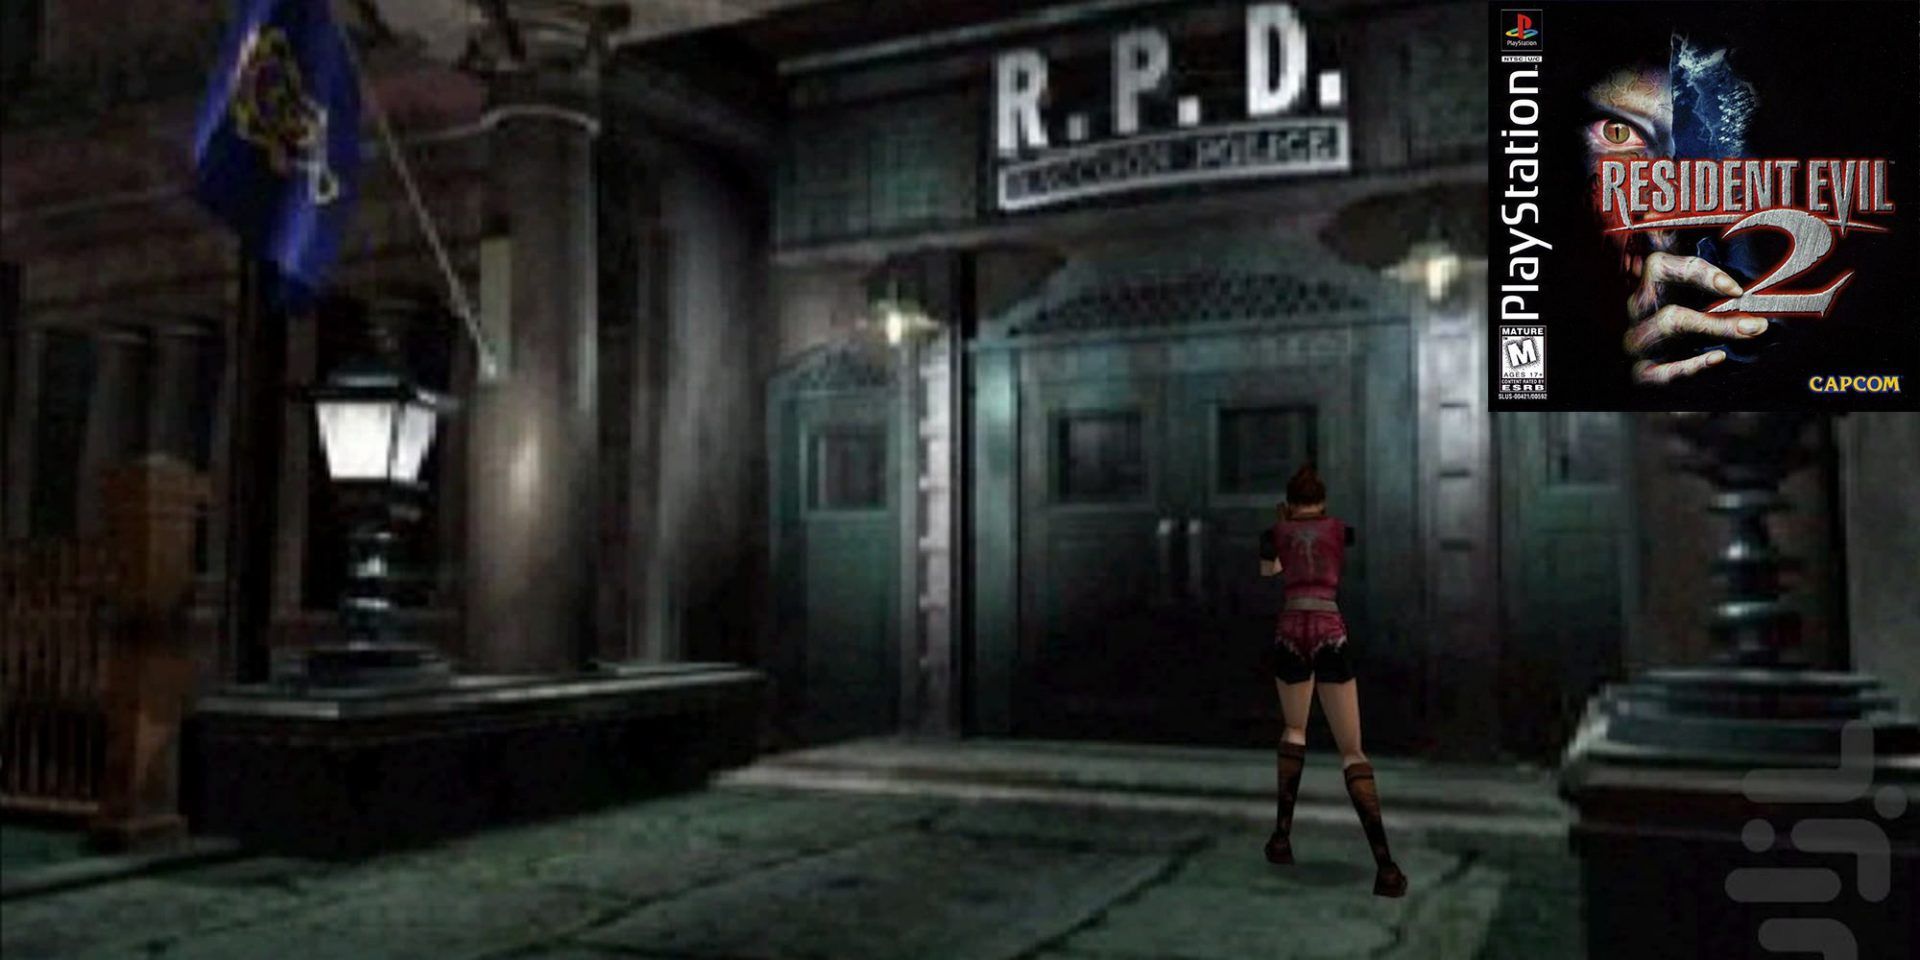 Screenshot from Resident Evil 2 PS1, with the game's cover in the top right corner.